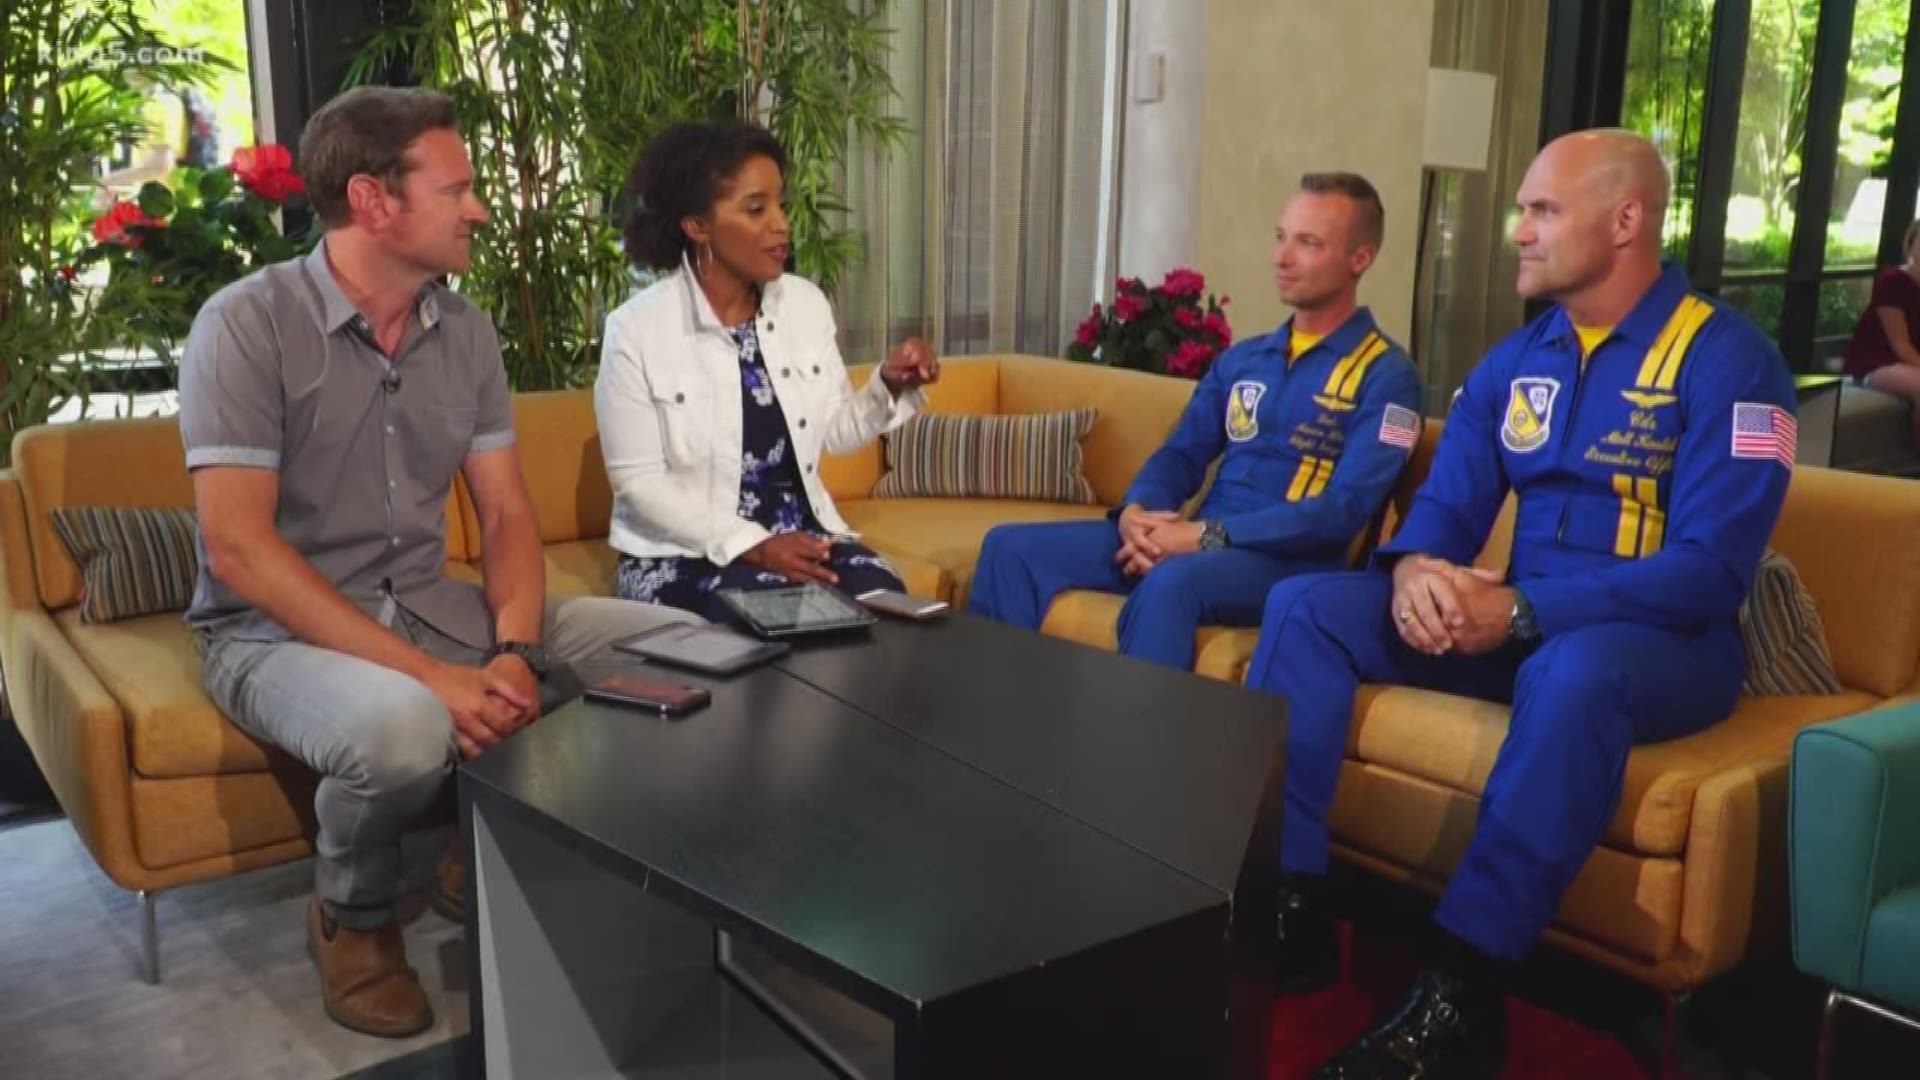 Blue Angels pilots from the Northwest are back in town to perform for Seafair. They stop by KING 5's Take 5 to share the exciting experience.